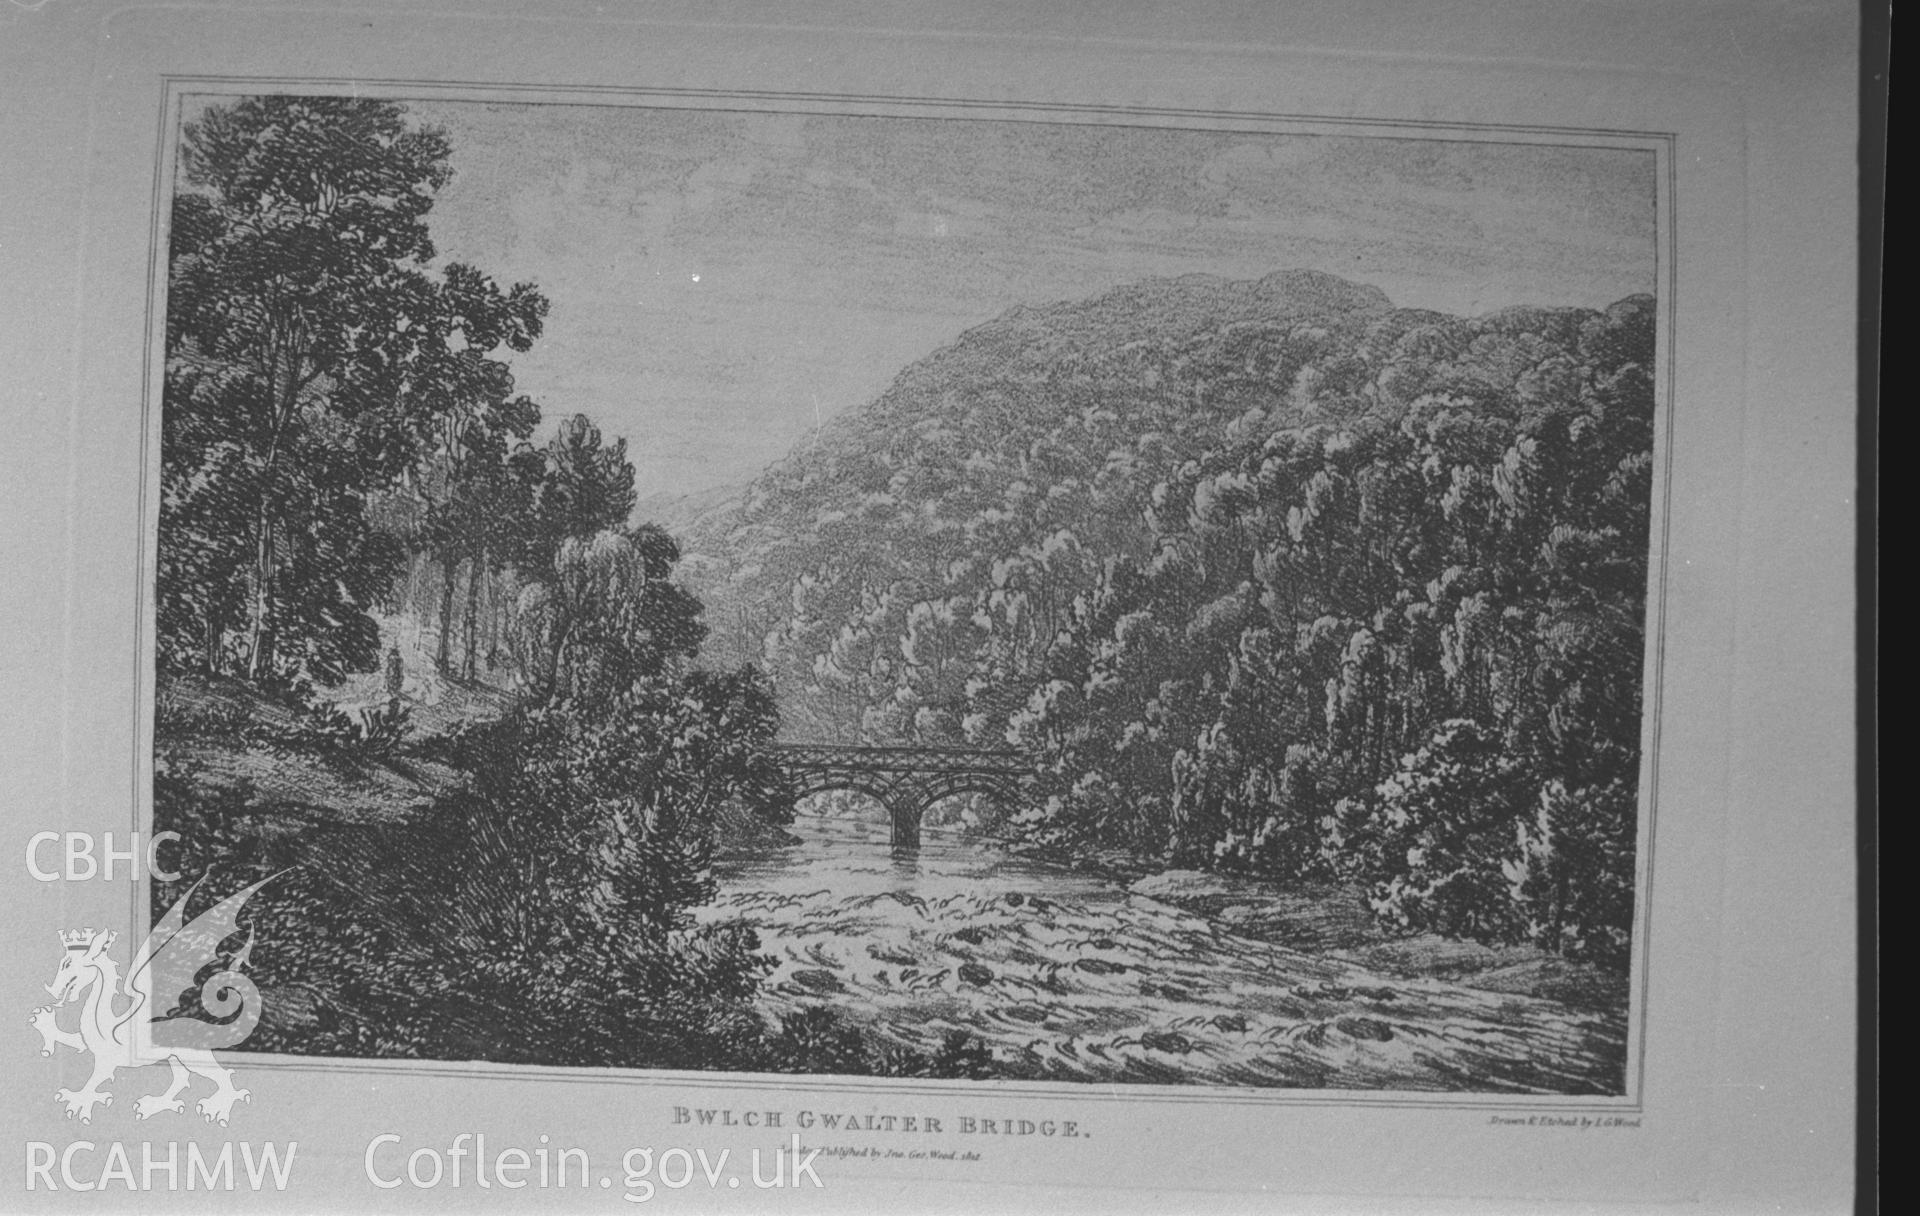 'Bwlch Gwalter Bridge' drawn and engraved by J. G. Woods, c.1810. Photographed by Arthur O. Chater in January 1968 for his own private research.